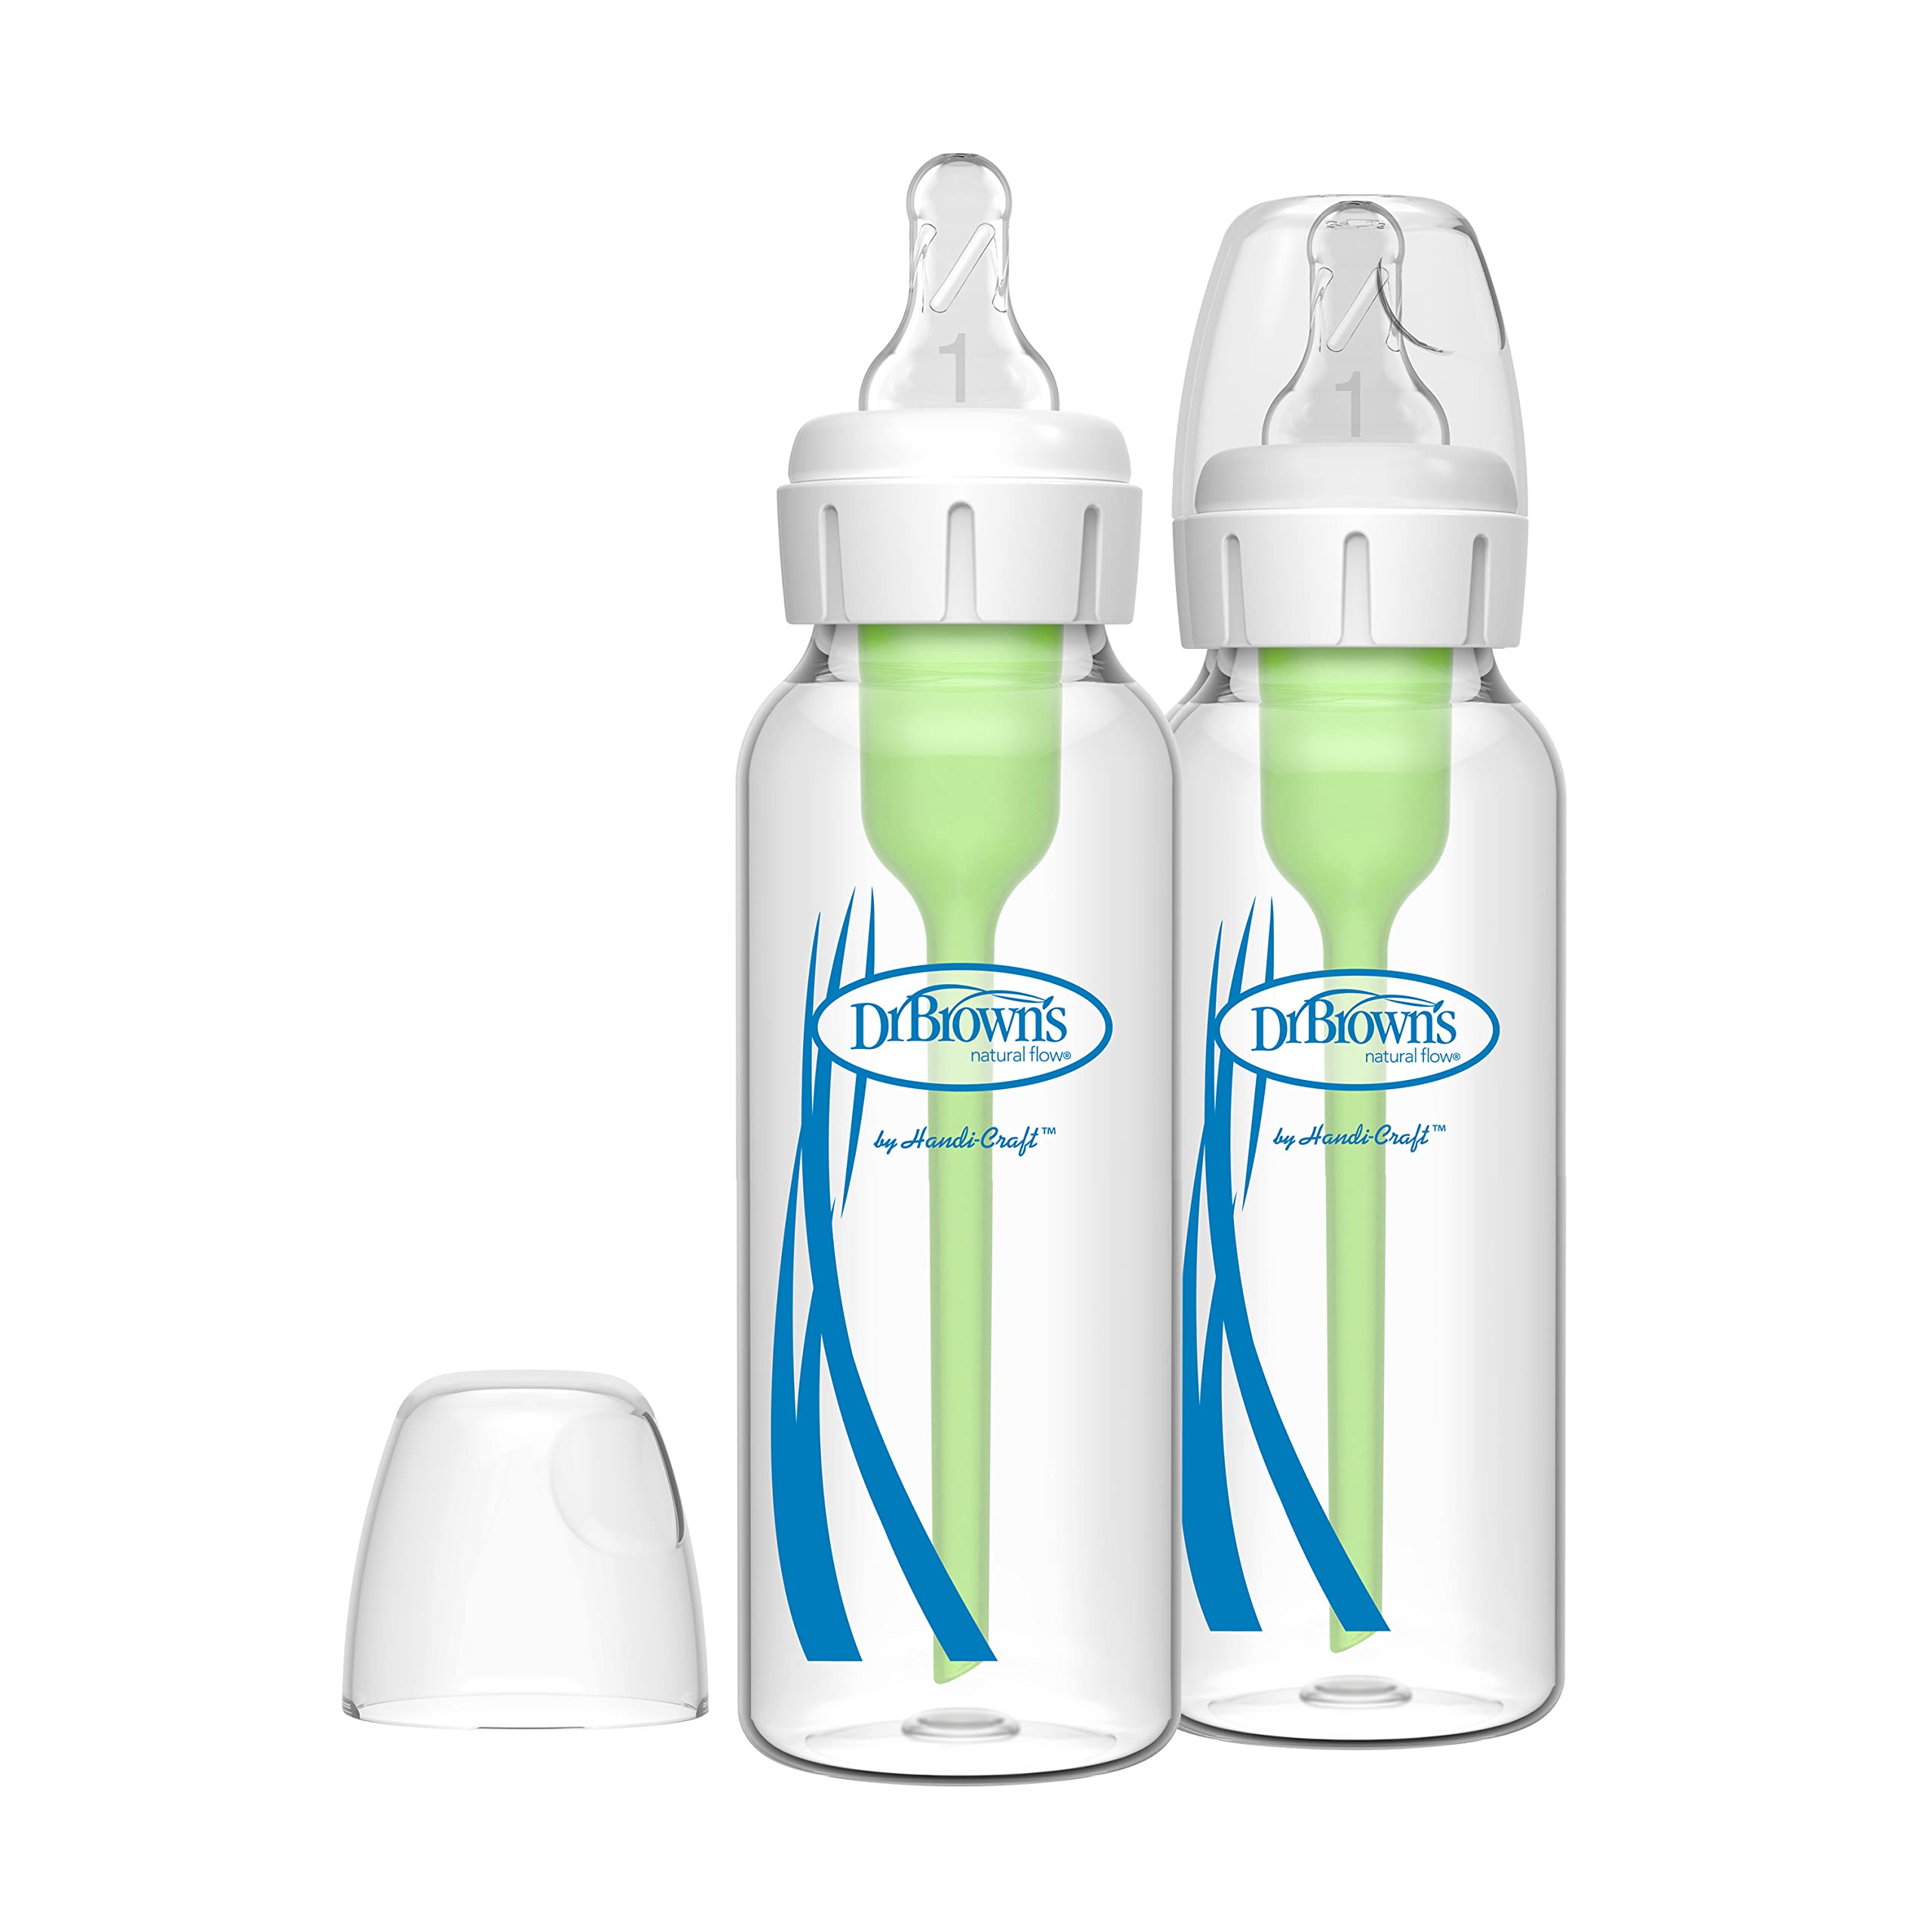 Dr. Brown's Natural Flow Options+ Narrow Glass Baby Bottles, 8oz, 2-Pack